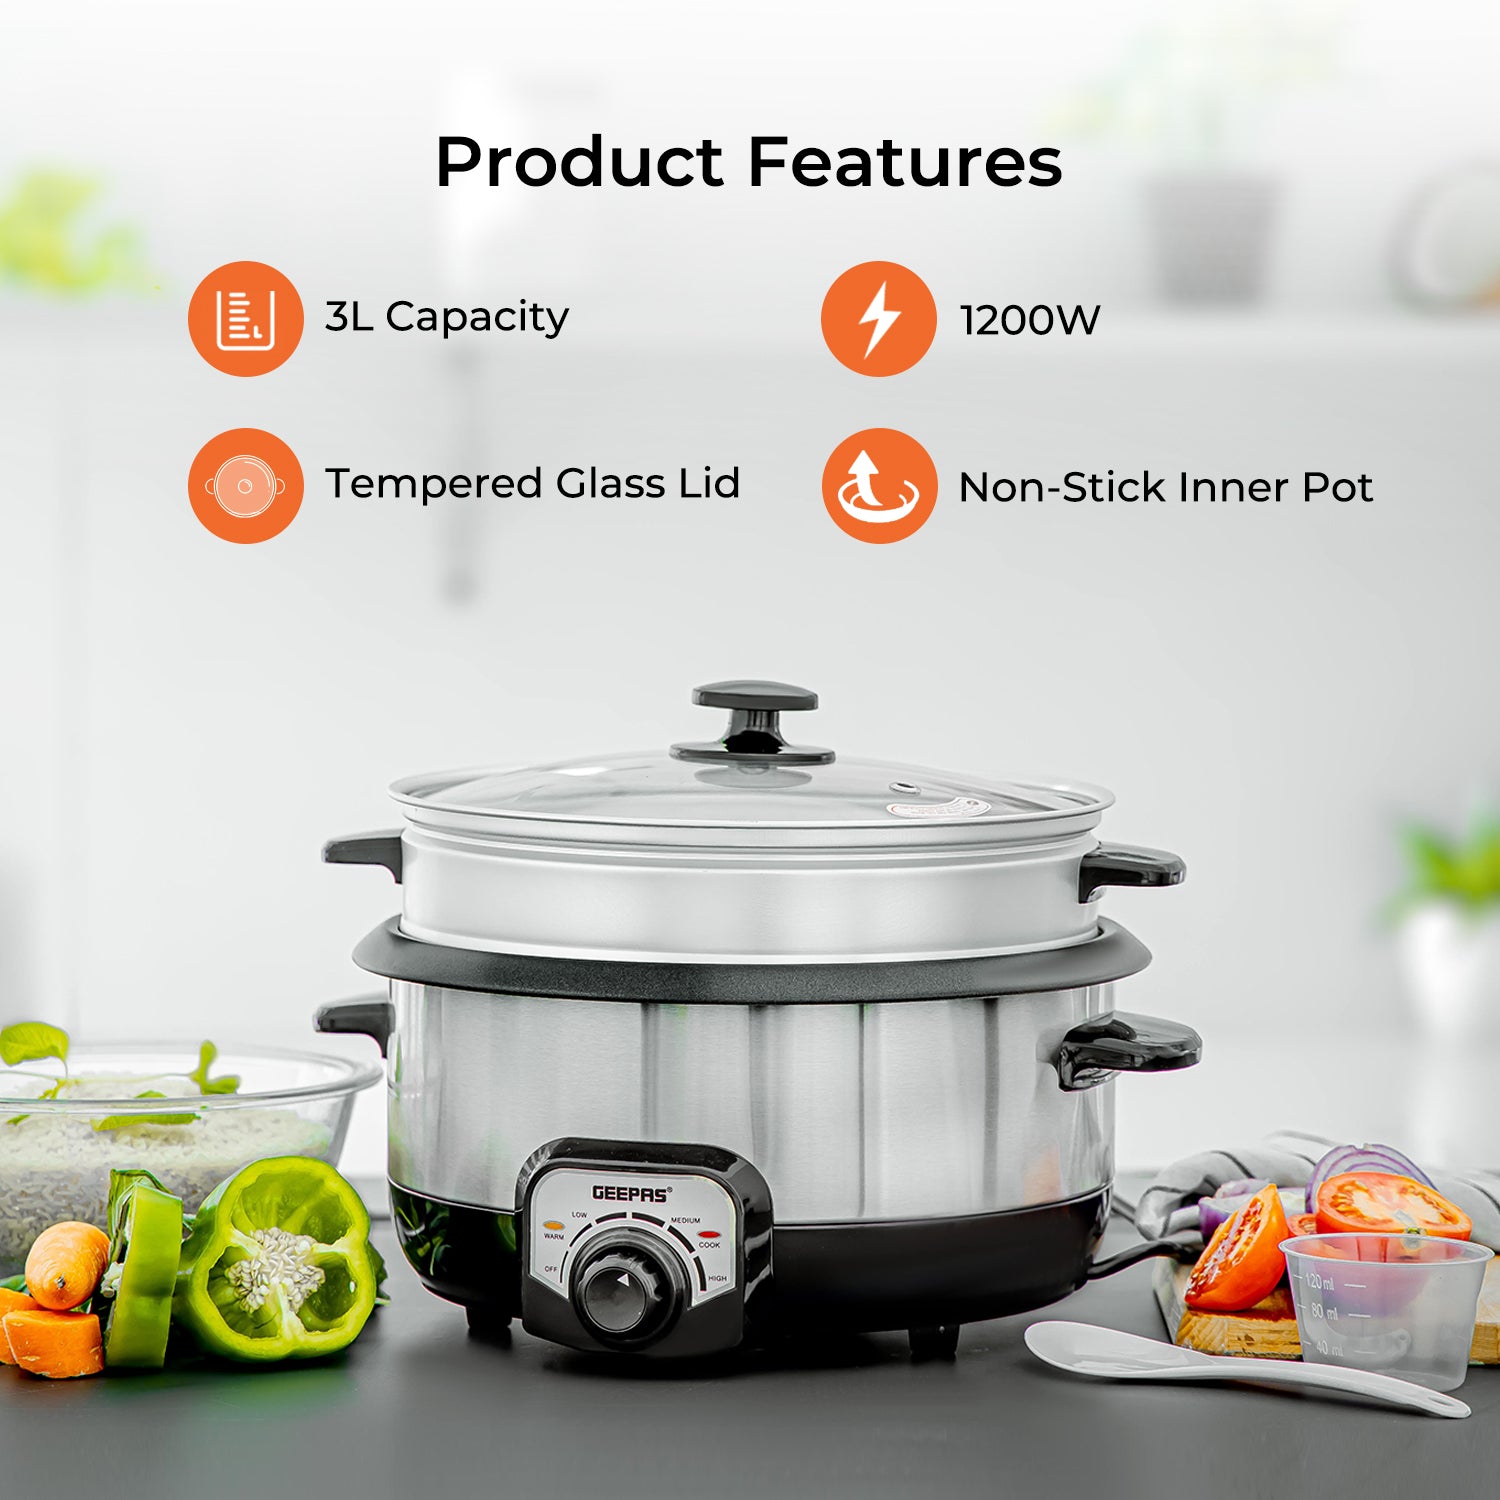 7-In-1 Smart Stack Multi Cooker, Steamer and Slow Cooker